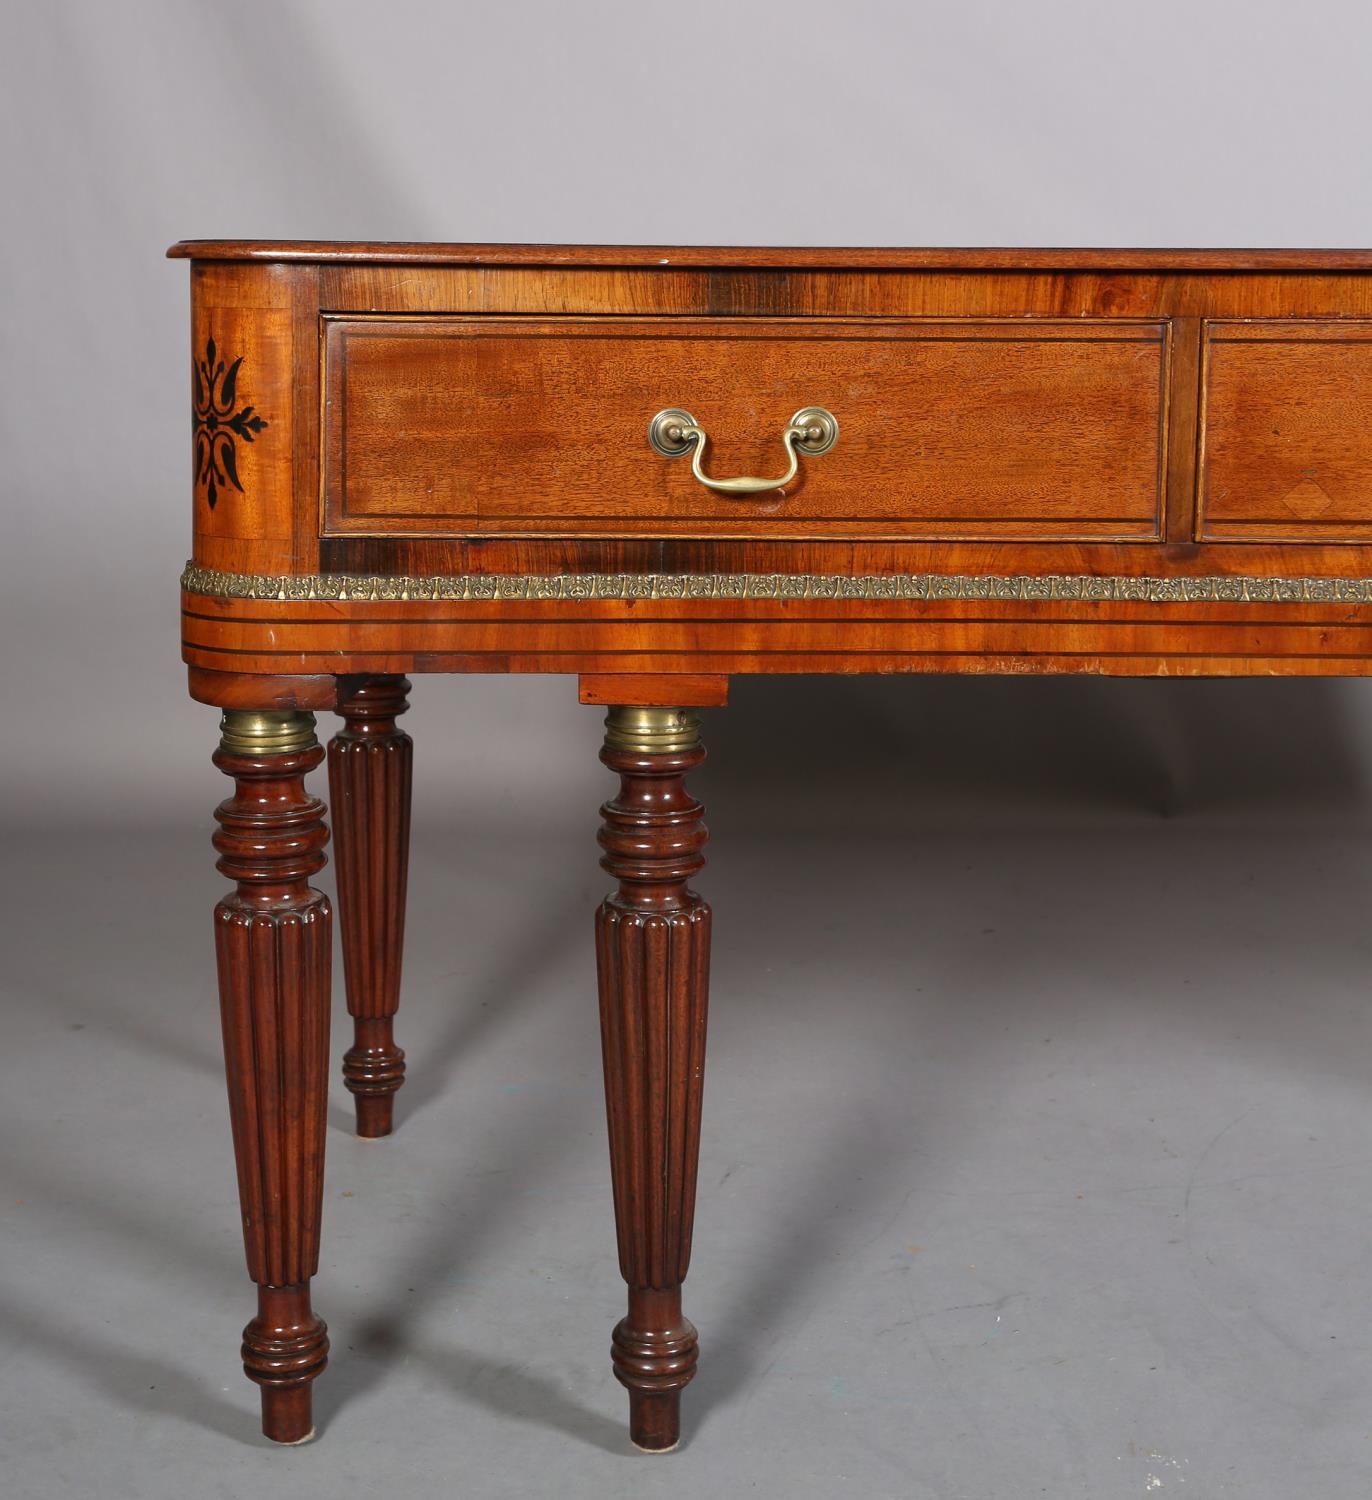 A George IV mahogany and rosewood crossbanded square piano, now converted to a side table, having - Image 3 of 7